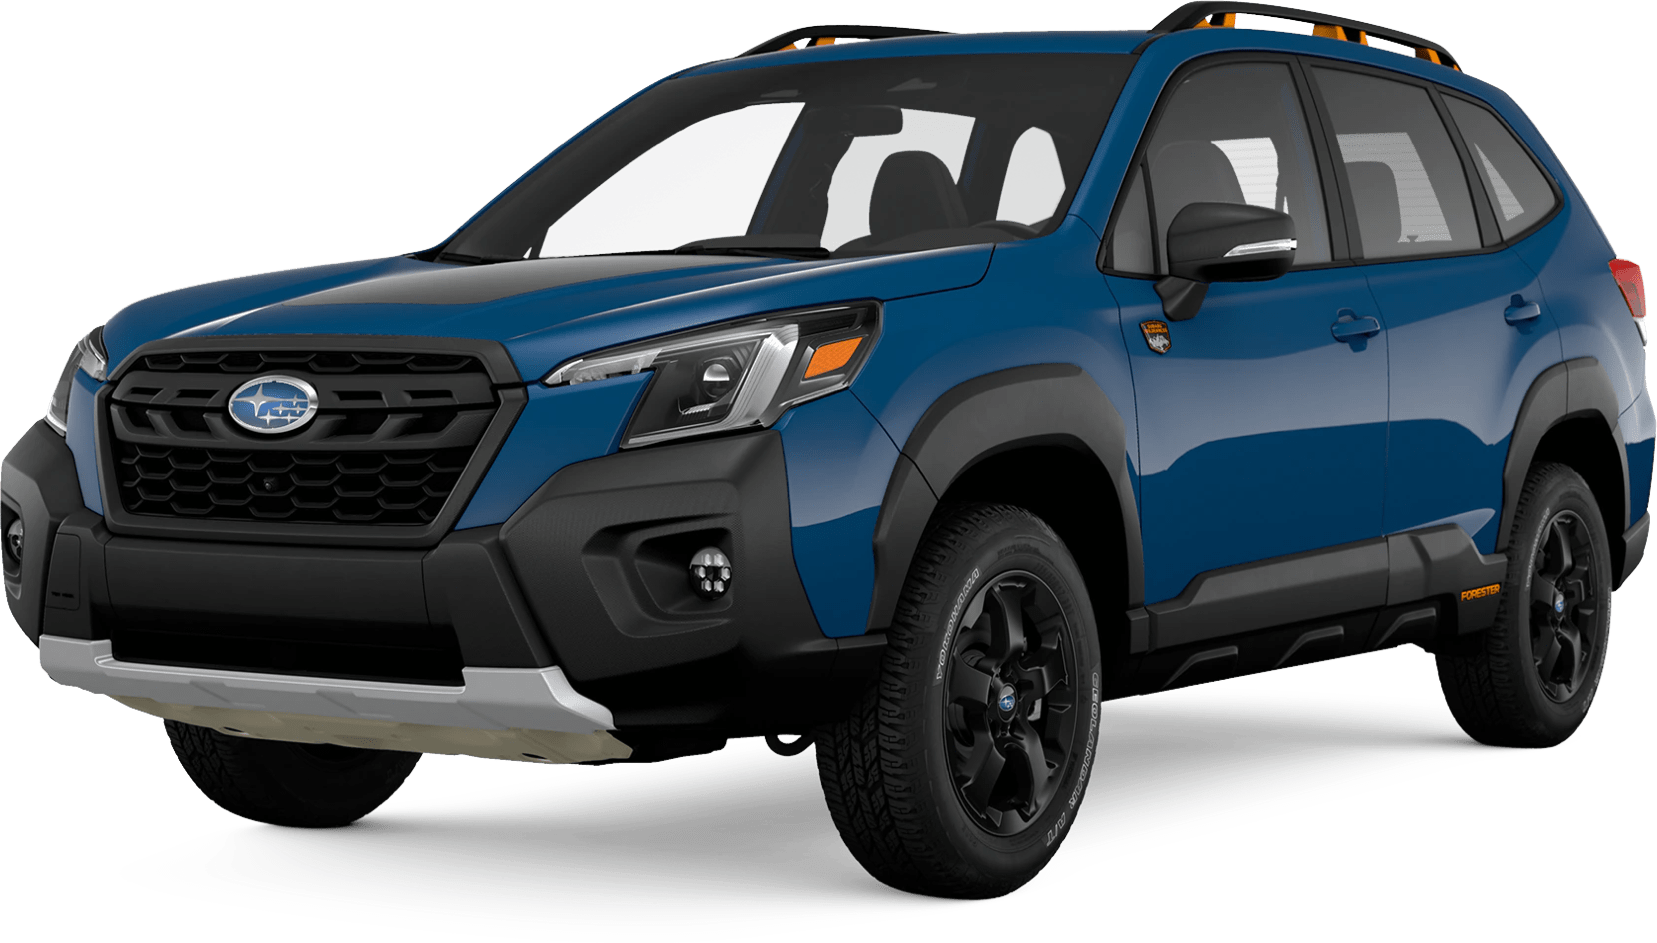 Preorder a new 2023 Subaru Forester Wilderness Edition SUV from Walser Subaru St. Paul near Maplewood, MN